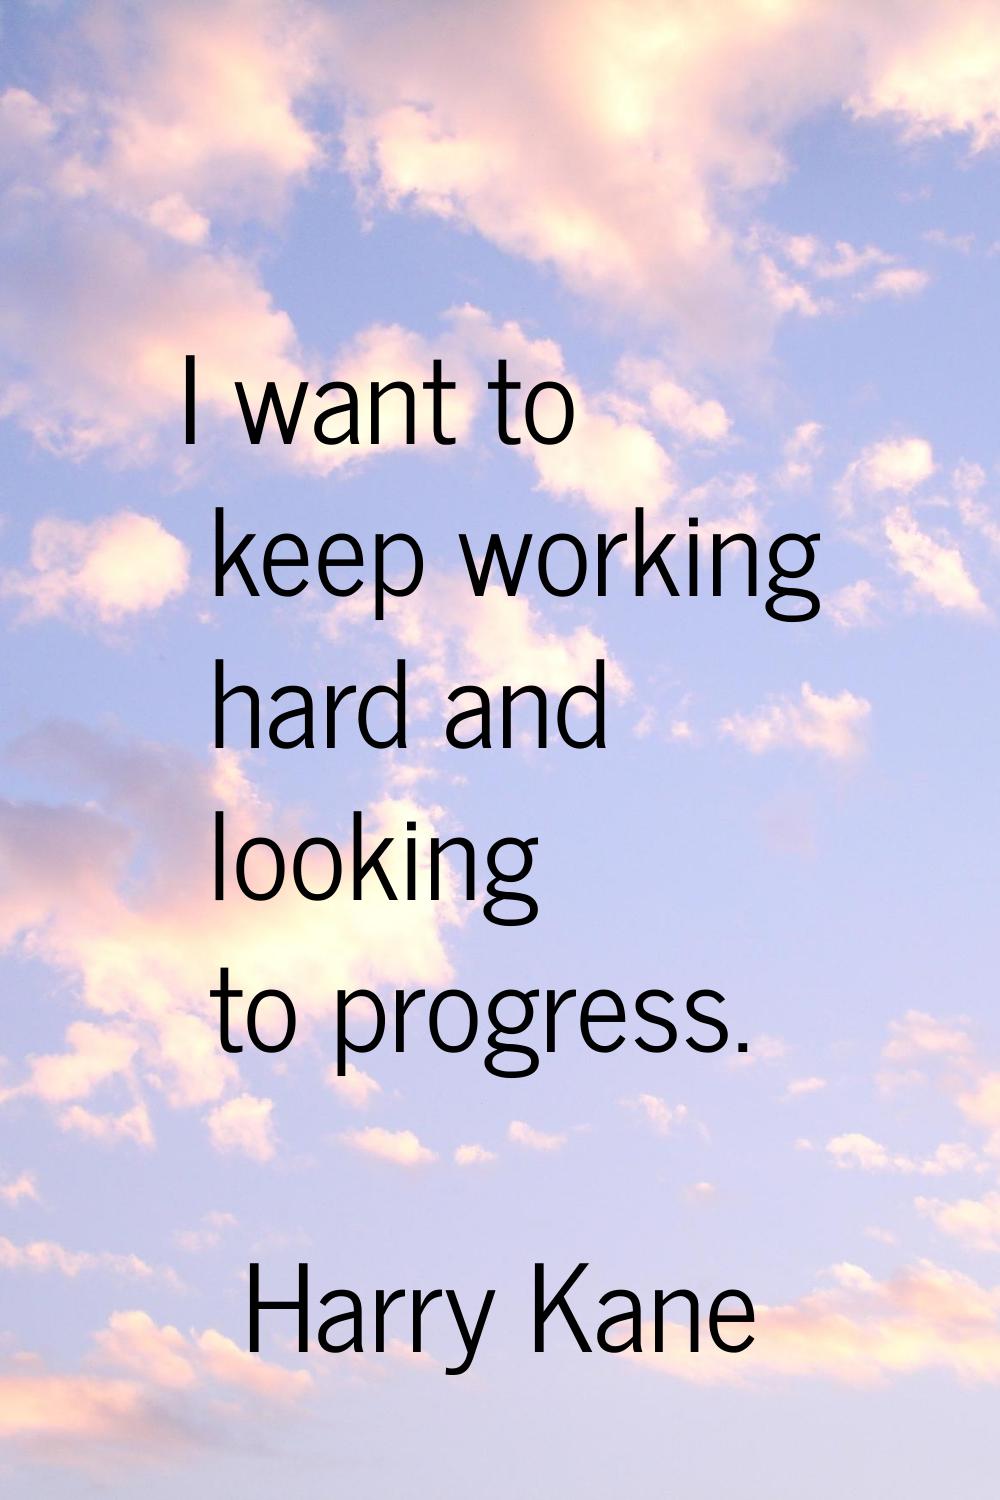 I want to keep working hard and looking to progress.